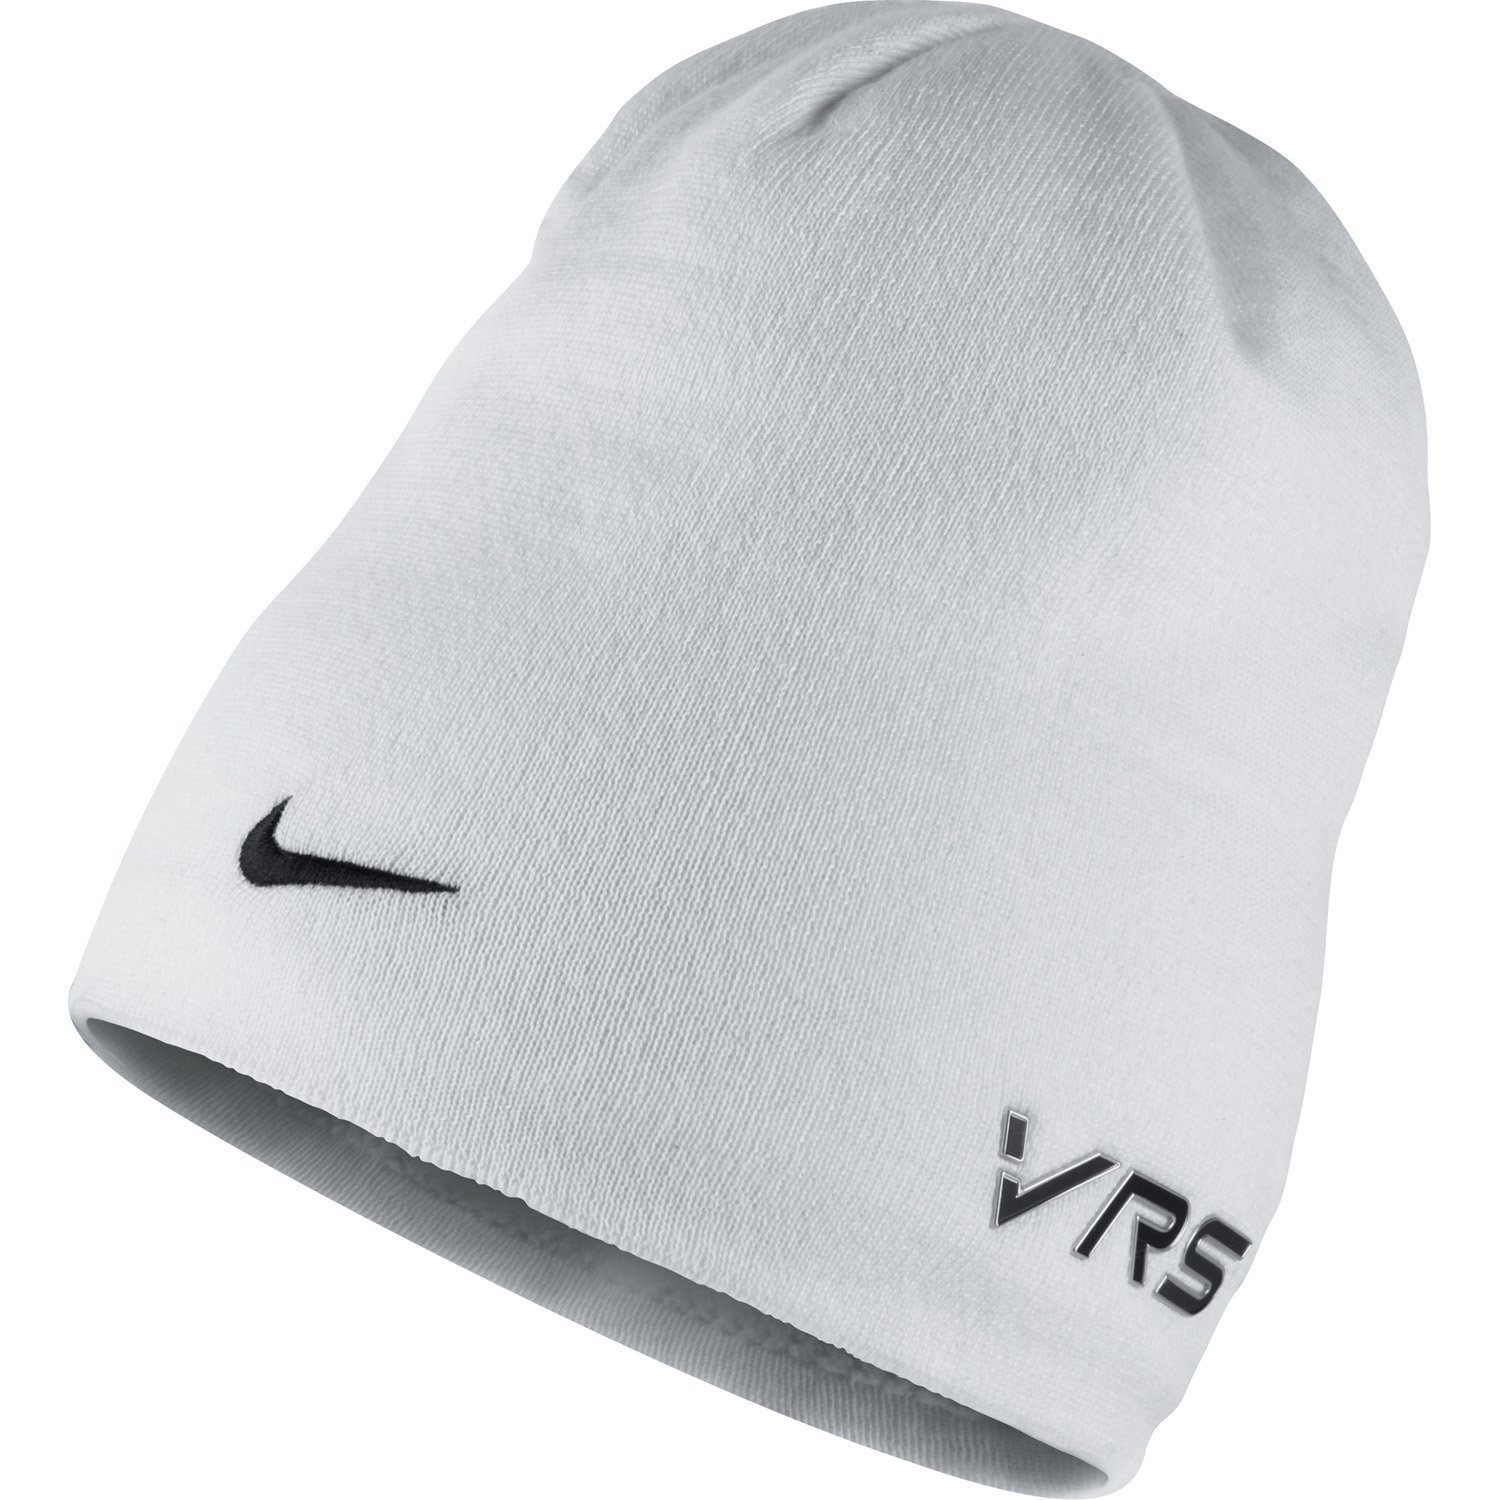 nike hats for winter